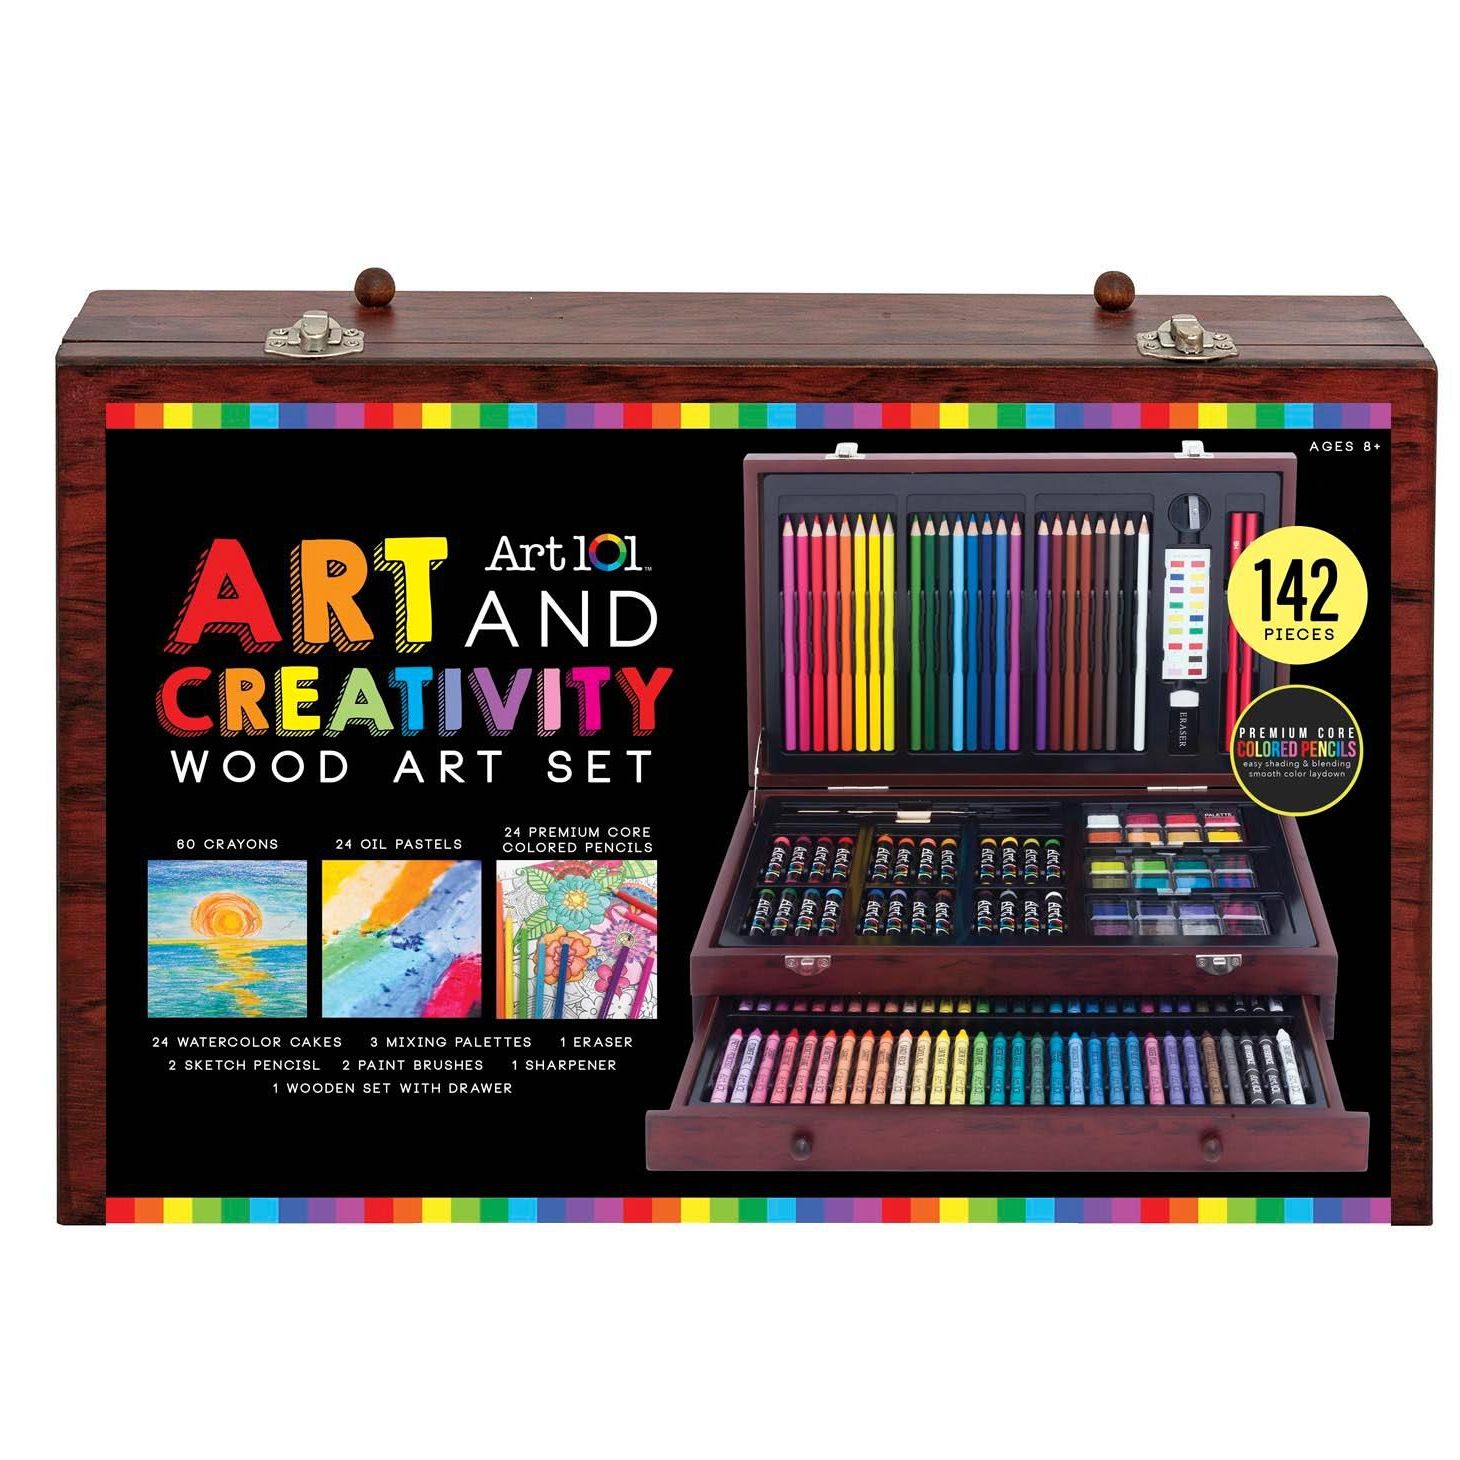 Download 12 Best Art & Craft Kits for Kids in 2018 - Kids Arts and Crafts Kits